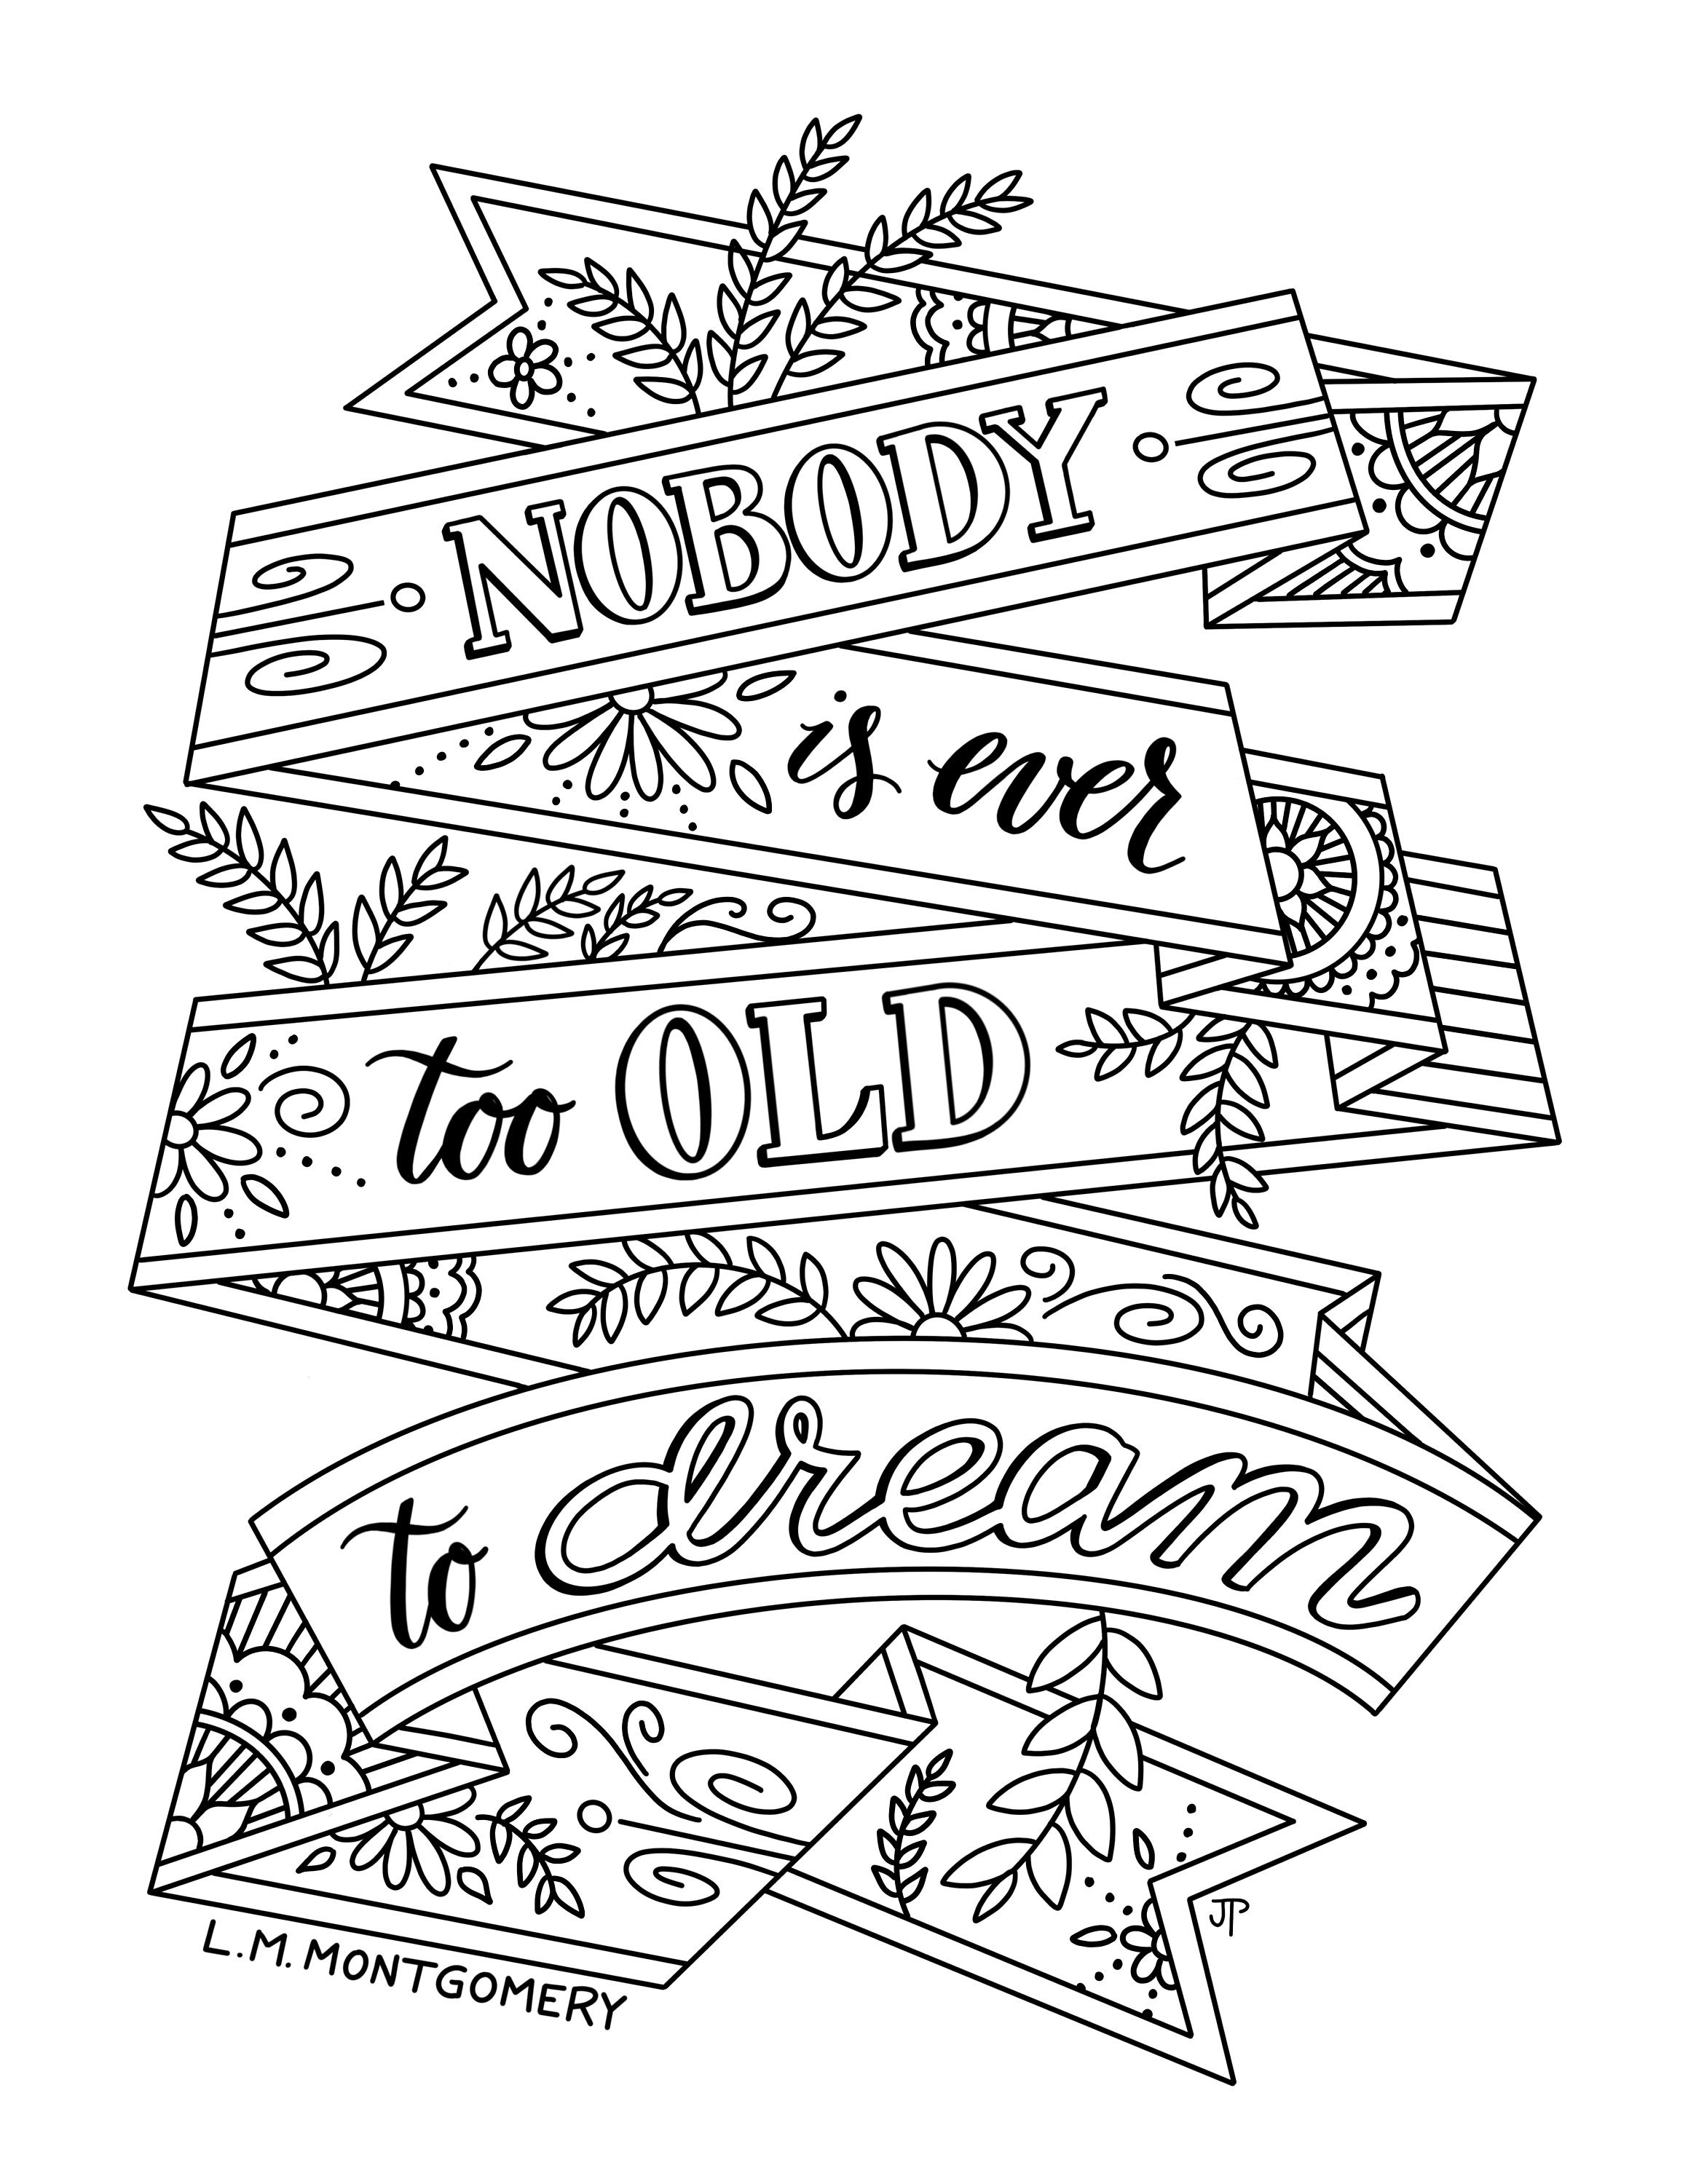 Nobody is Ever Too Old to Dream Coloring Page / LM Montgomery | Etsy